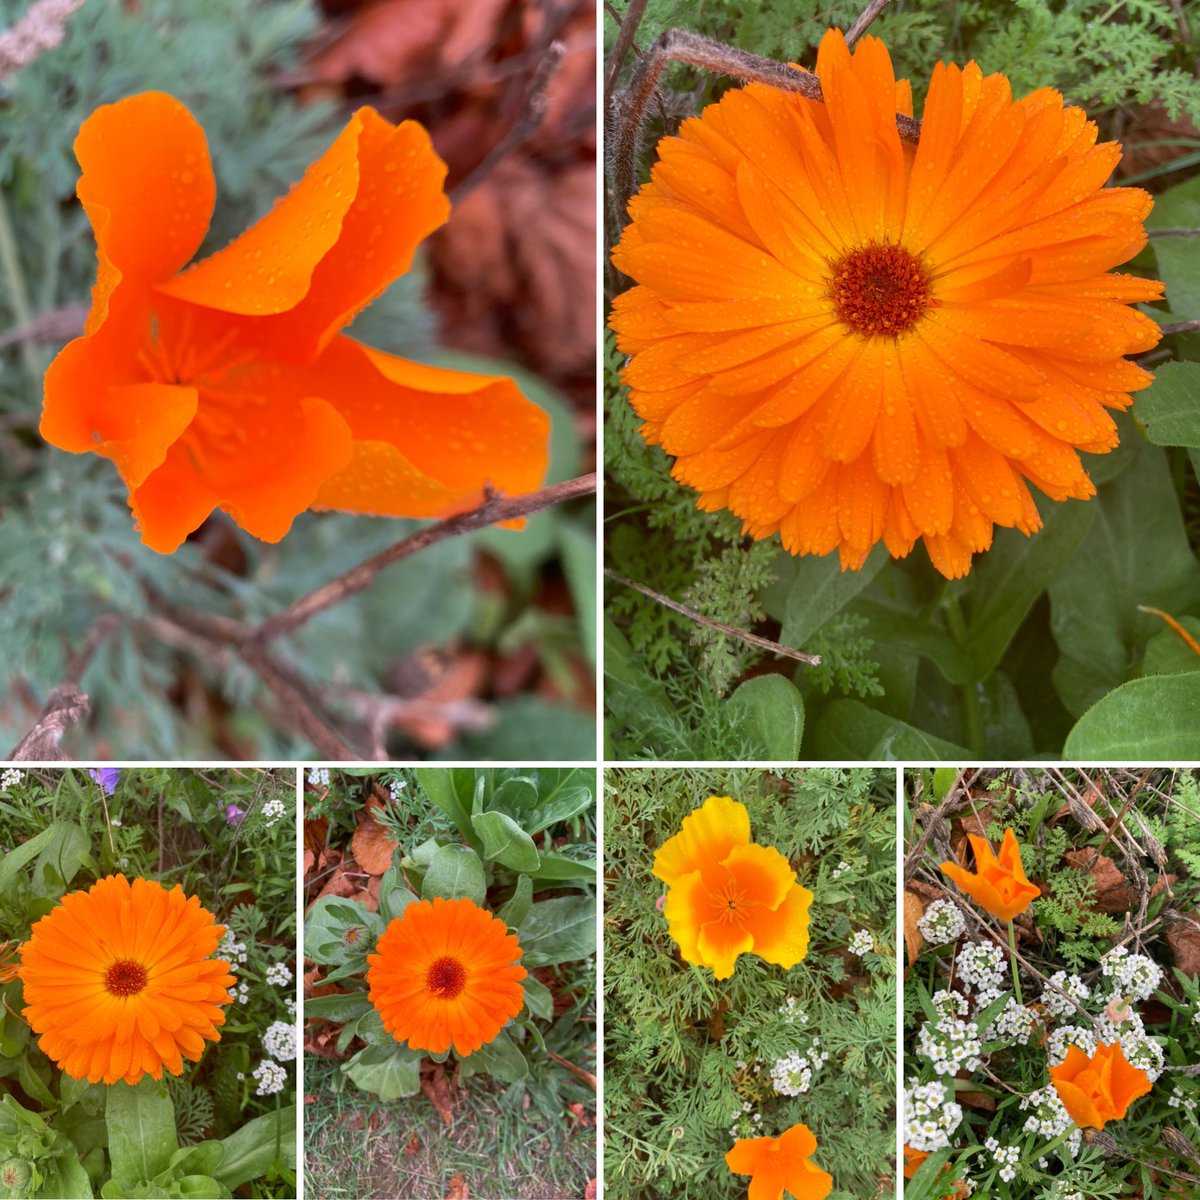 #sixonsaturday with flowers from one of the wildflowers patches in the park in town. Great to see the wild patches managing to recover after the dry end of summer! Have a happy weekend! #flowers #wildflowers #AutumnVibes #Autumn #autumnflowers #autumndroplets #SaturdayMotivation